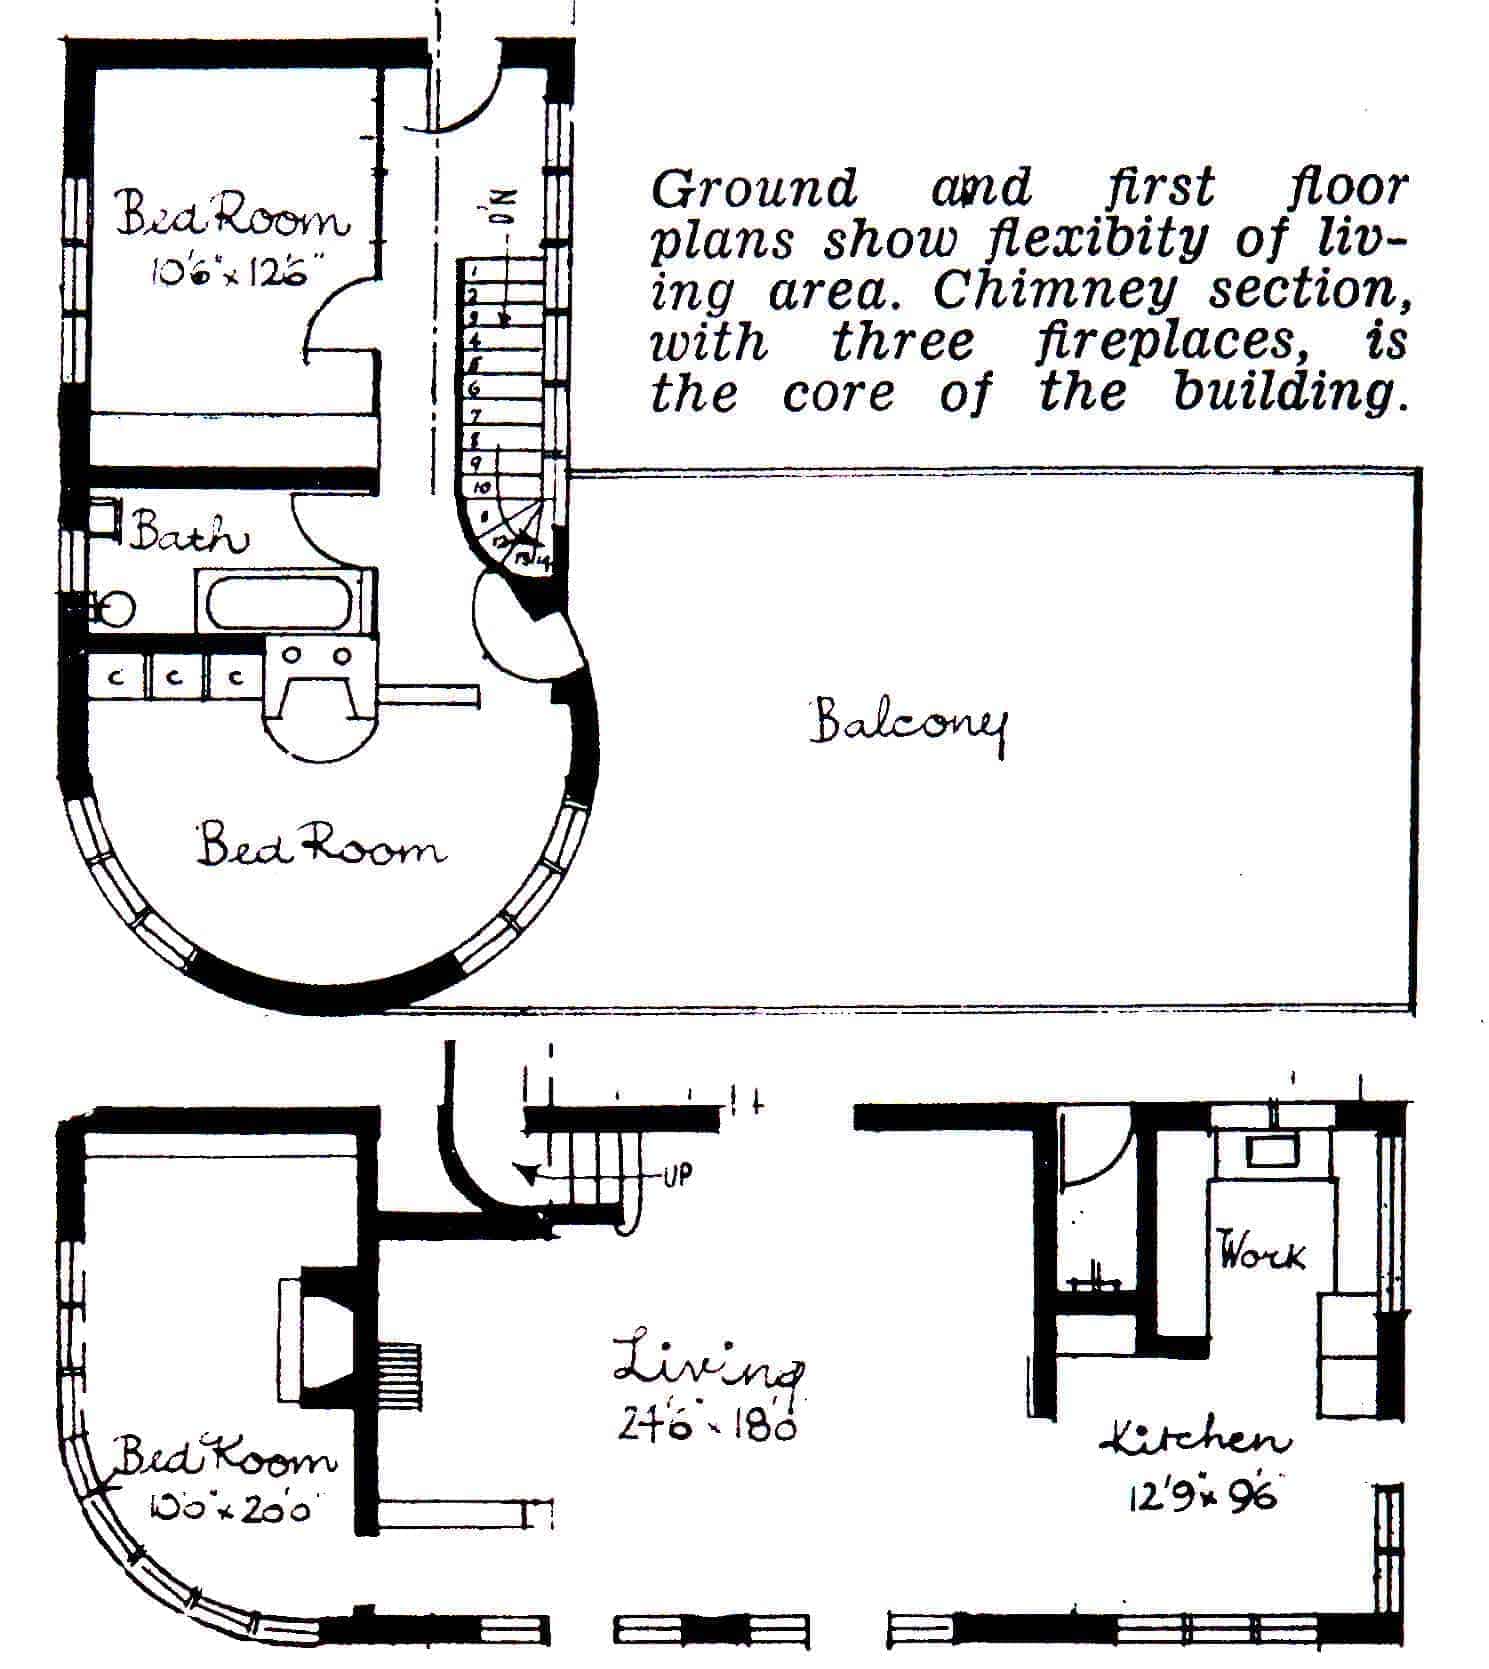 Plan of the McLennan house